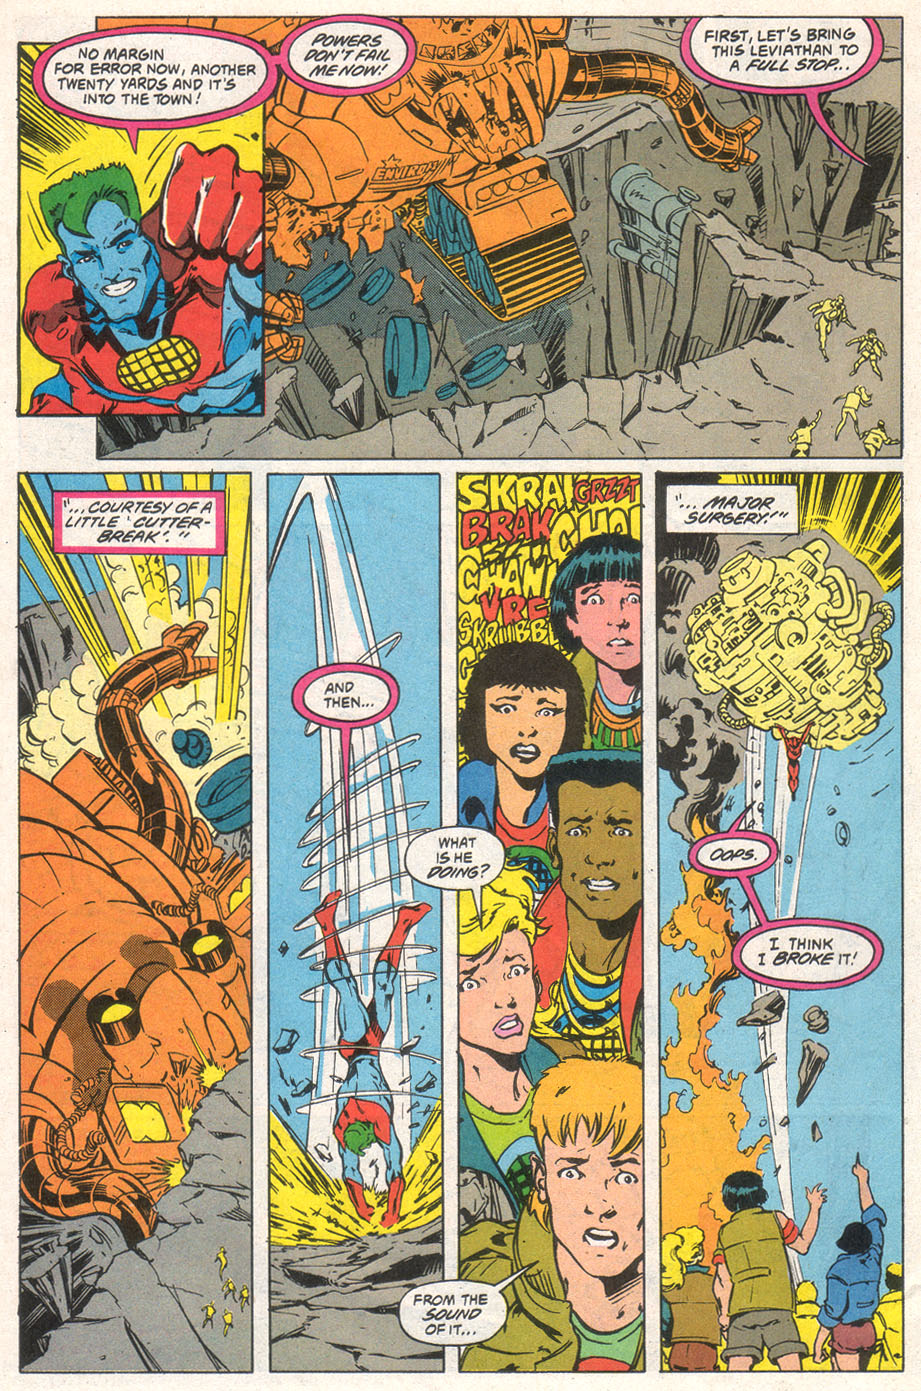 Captain Planet and the Planeteers 12 Page 12